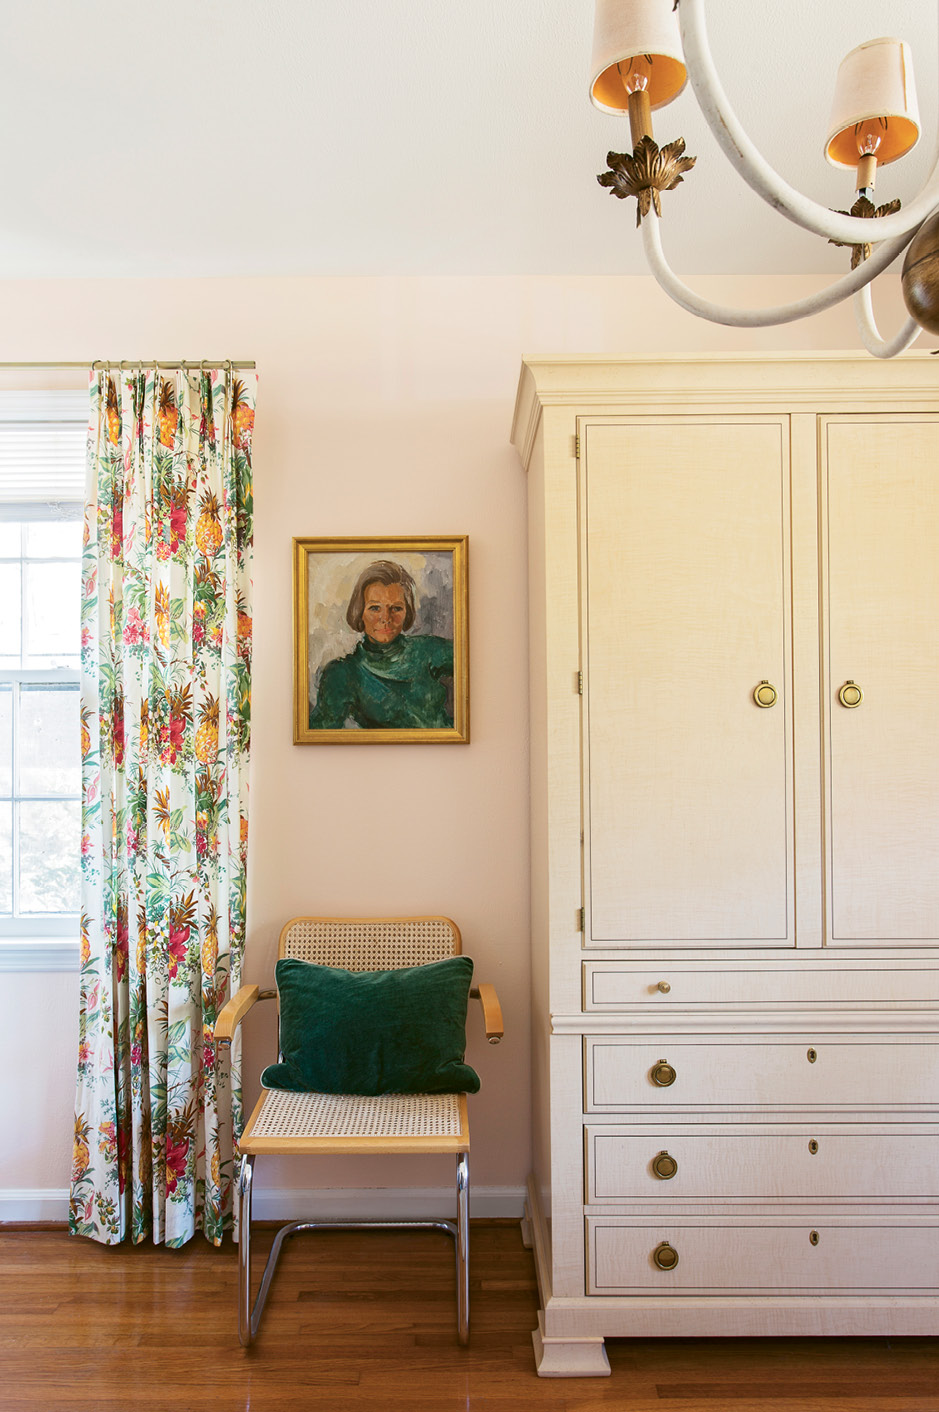 VINTAGE VIBE: In Tinkler’s home office, an antique Drexel armoire provides a handsome home for paperwork. Caned chairs, botanical textiles, and an antique portrait in a gilt frame lend a laid-back glamour to the work space.